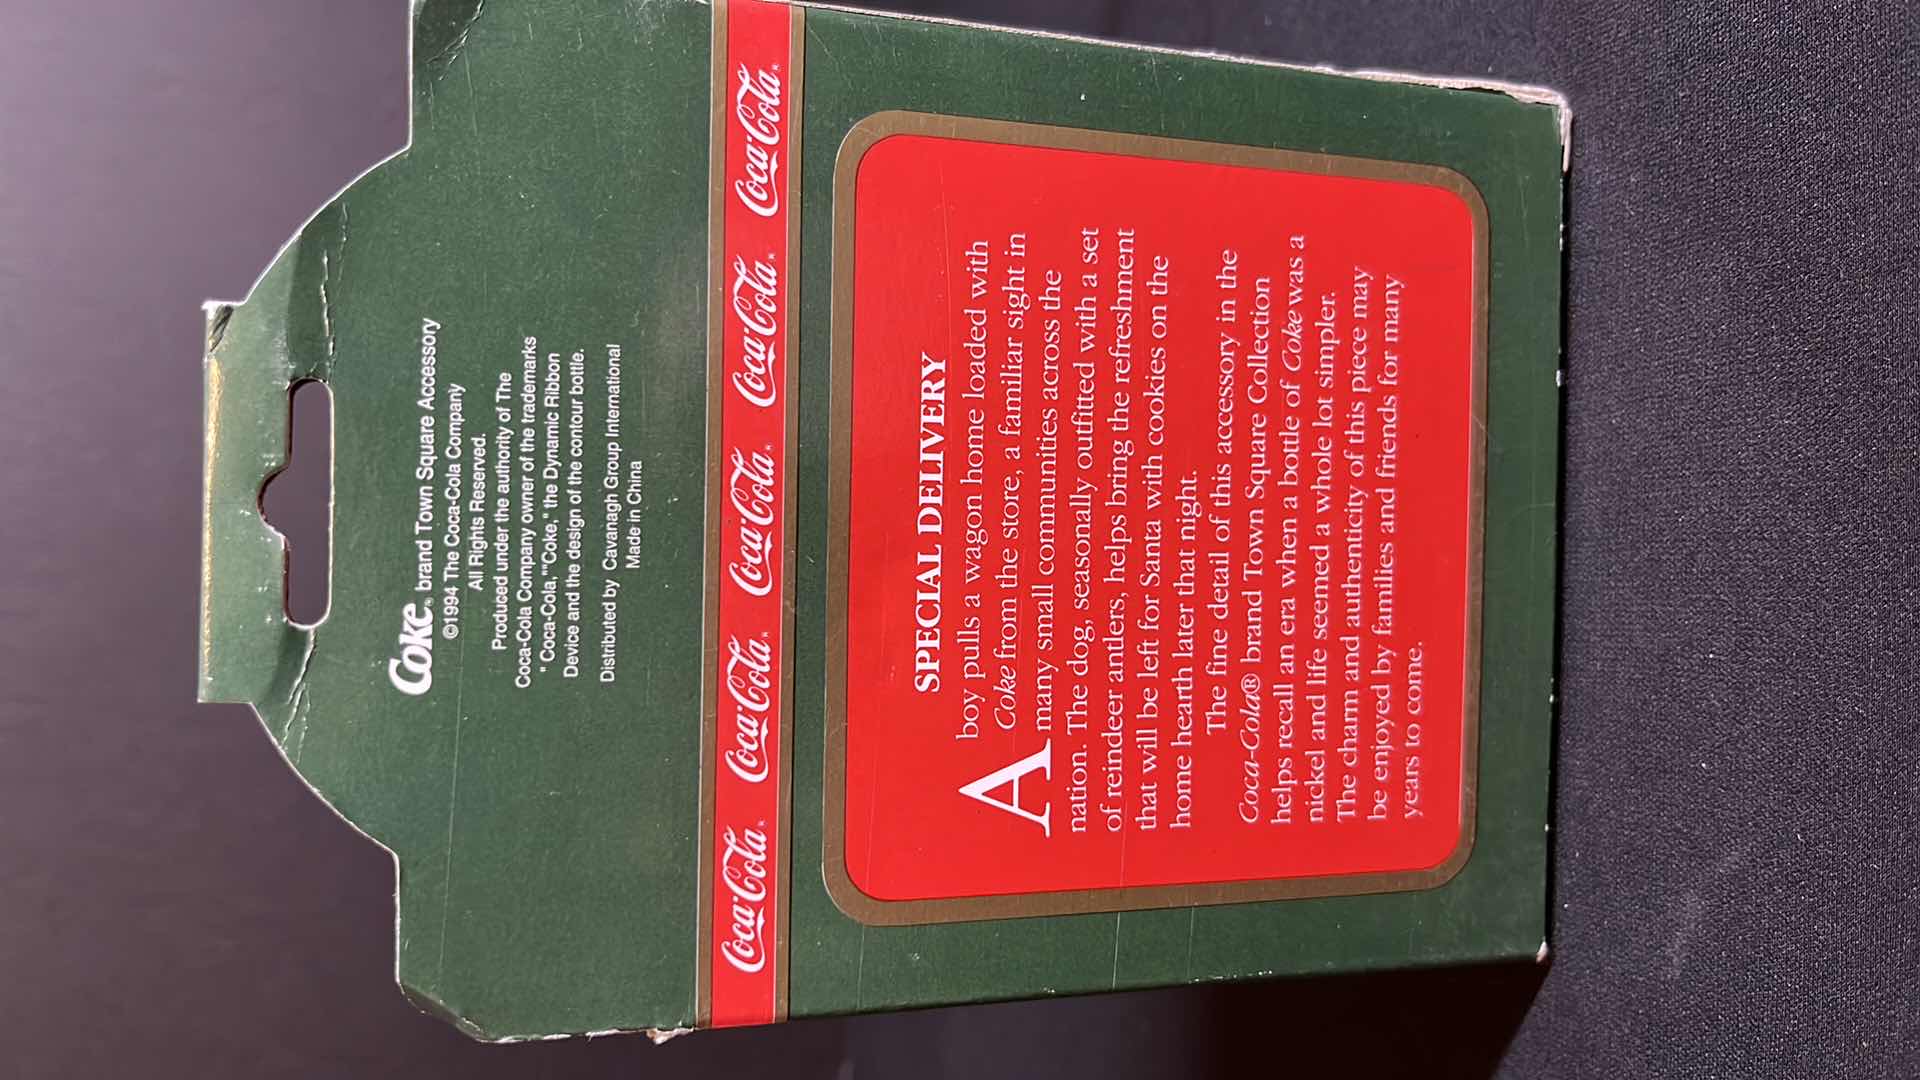 Photo 4 of COCA-COLA CHRISTMAS ORNAMENTS, TOWN SQUARE COLLECTION SPECIAL DELIVERY 1994 (ITEM #64326), TRIM A TREE ILLUMINATED ORNAMENT 2003 (ITEM #CA079912)